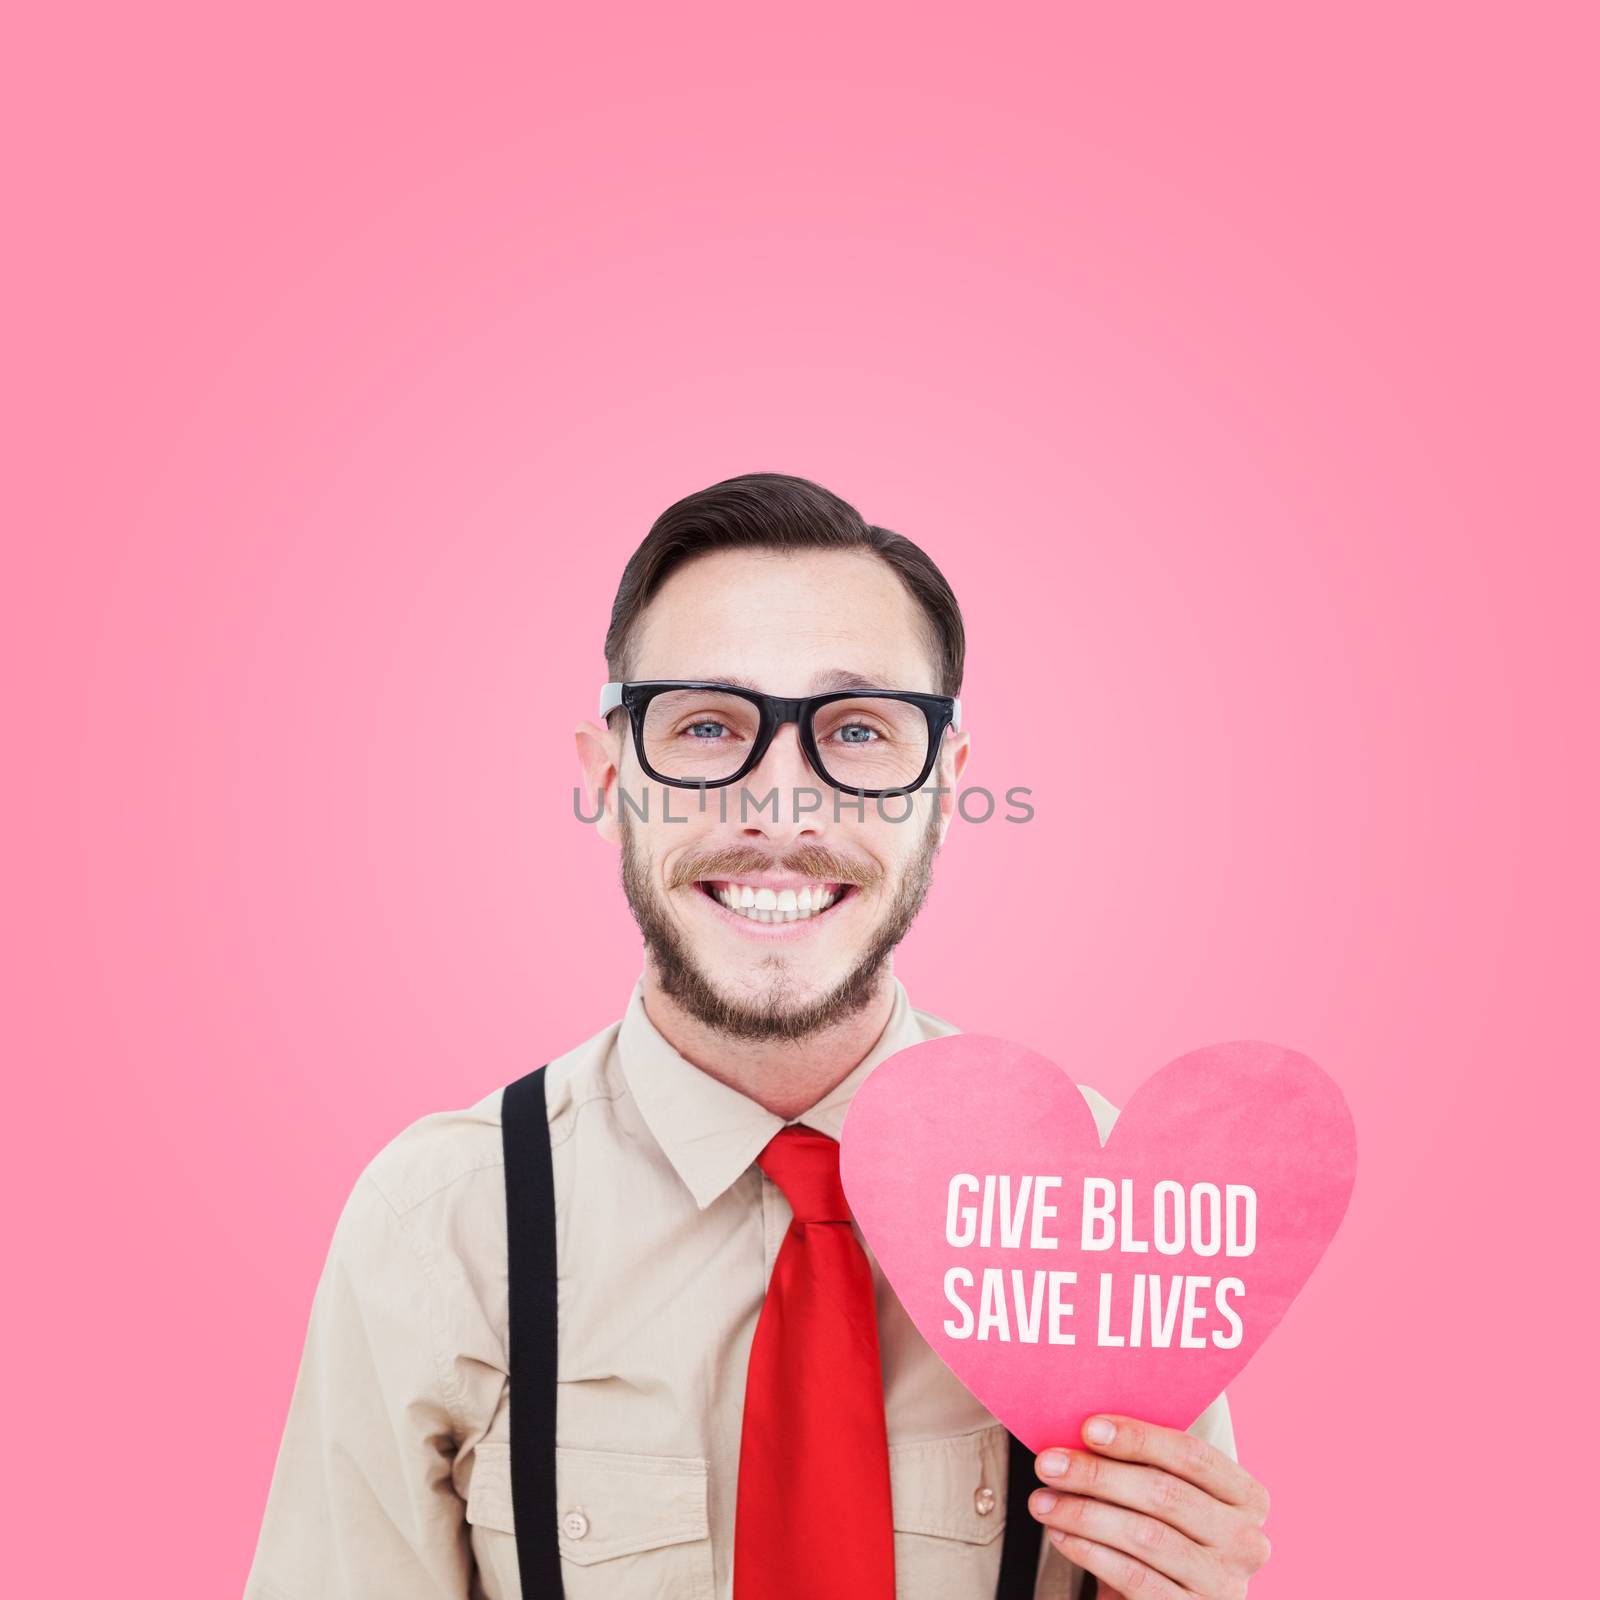 Geeky hipster smiling and holding heart card against pink